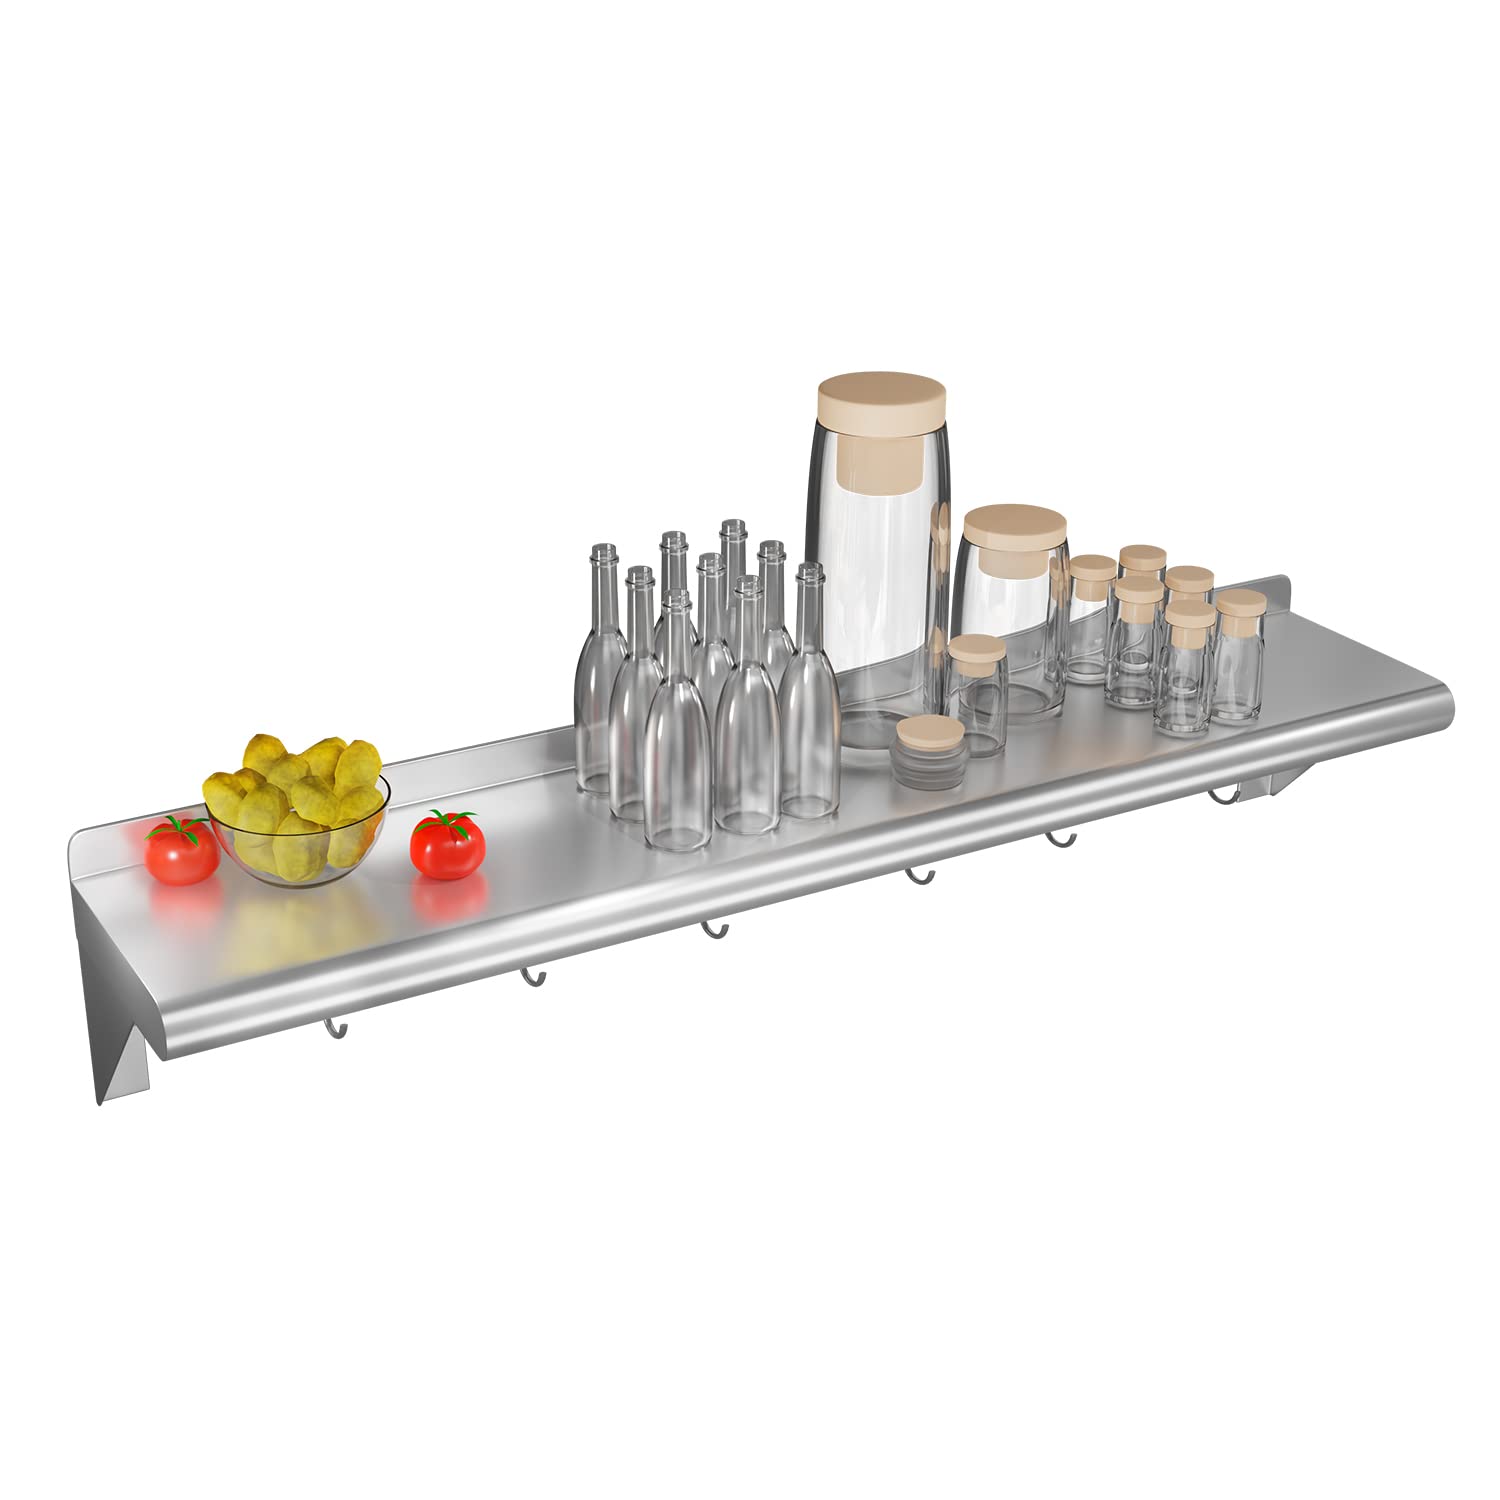 NCOEN Stainless-Steel-Shelf Wall Mounted with 6 Hooks